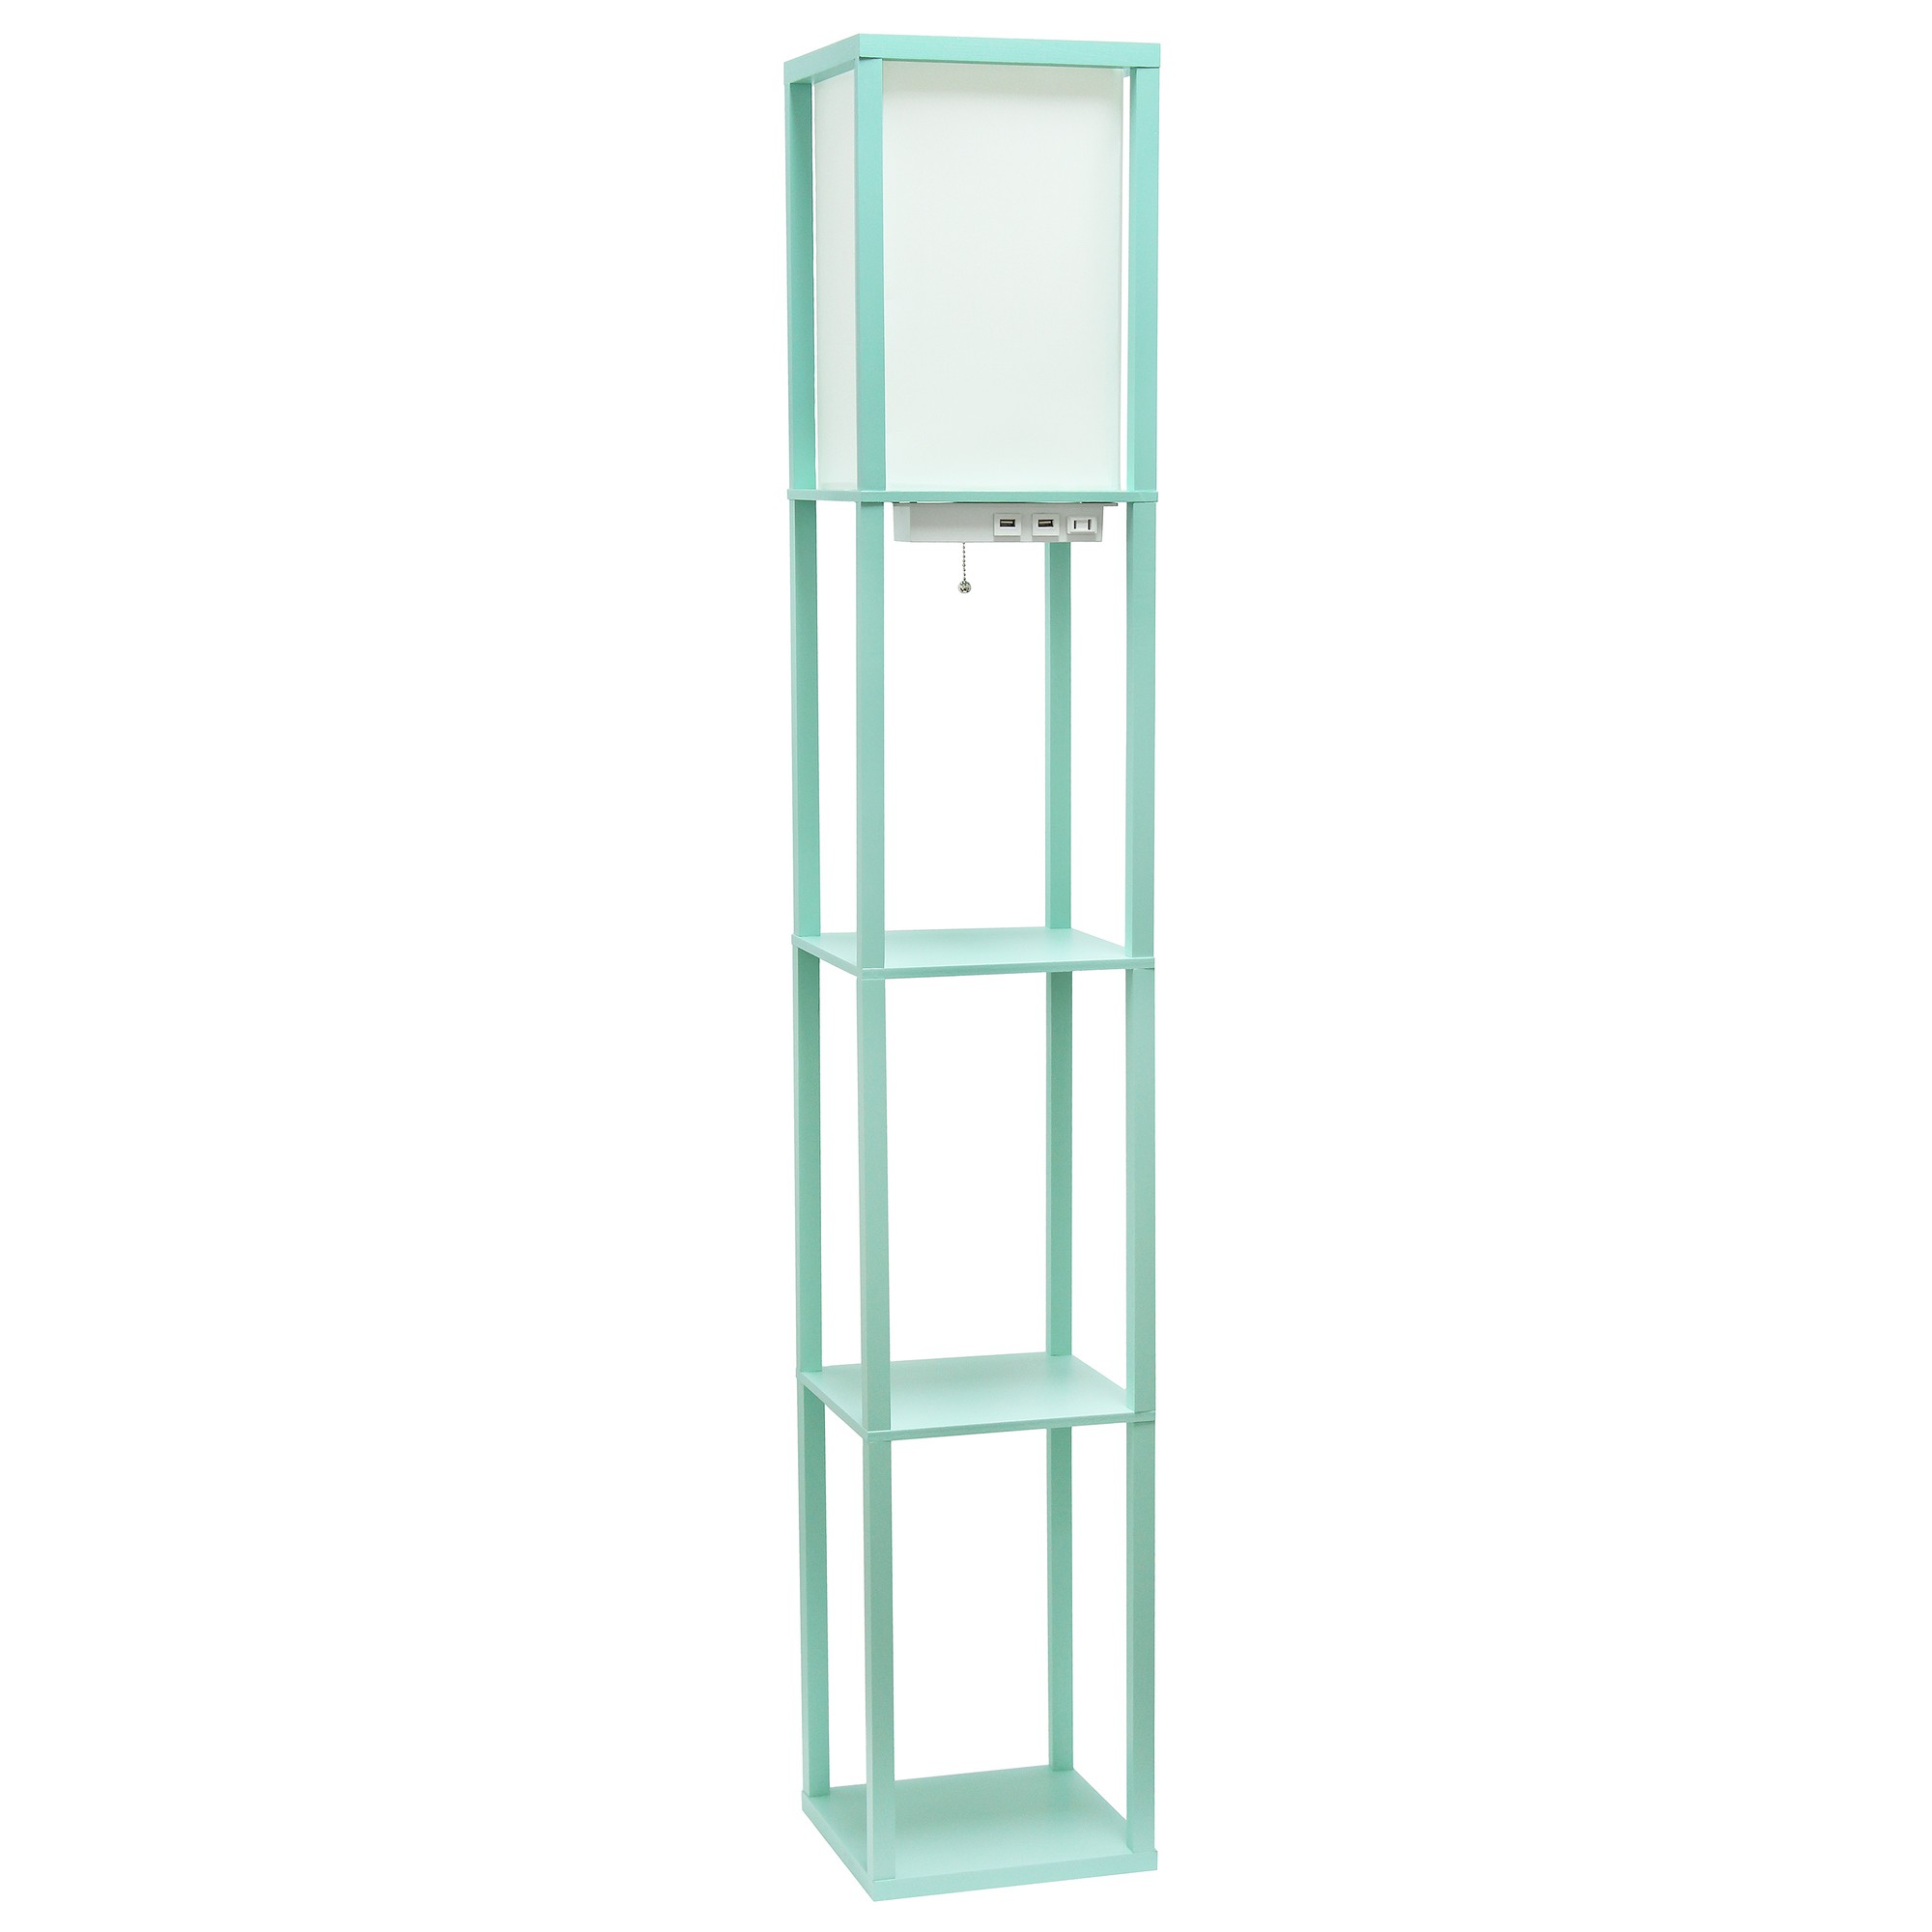 Simple Designs Floor Lamp Etagere Organizer Storage Shelf with 2 USB Charging Ports, 1 Charging Outlet and Linen Shade, Aqua